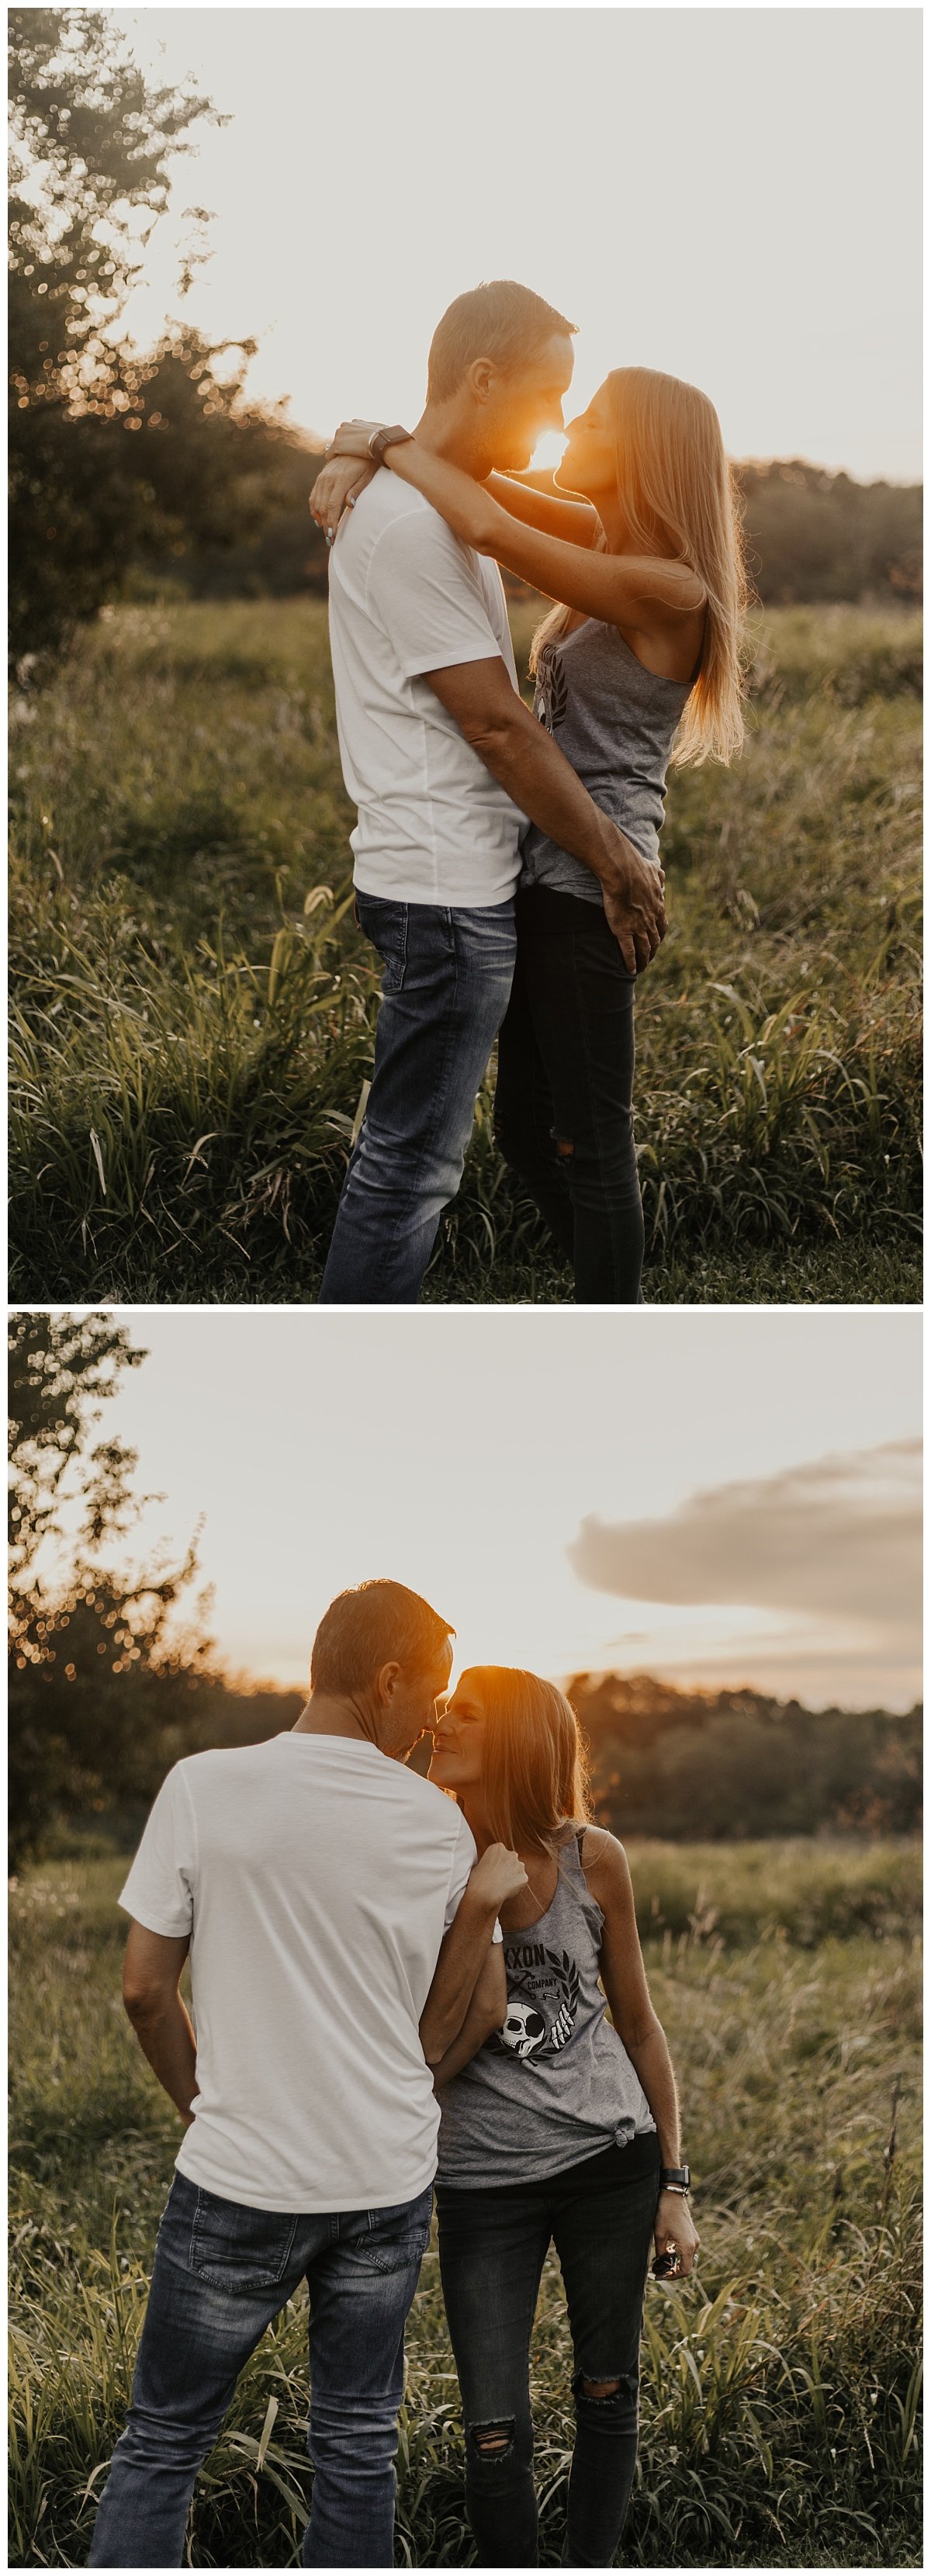 motorcycle+session+_+adventure+session+_+engagement+session+_+motorcycle+photos+_+lana+del+rey+_+ride+or+die+_+adventurous+couple+_+kansas+city+photographer+_+kansas+city+photography (5).jpeg